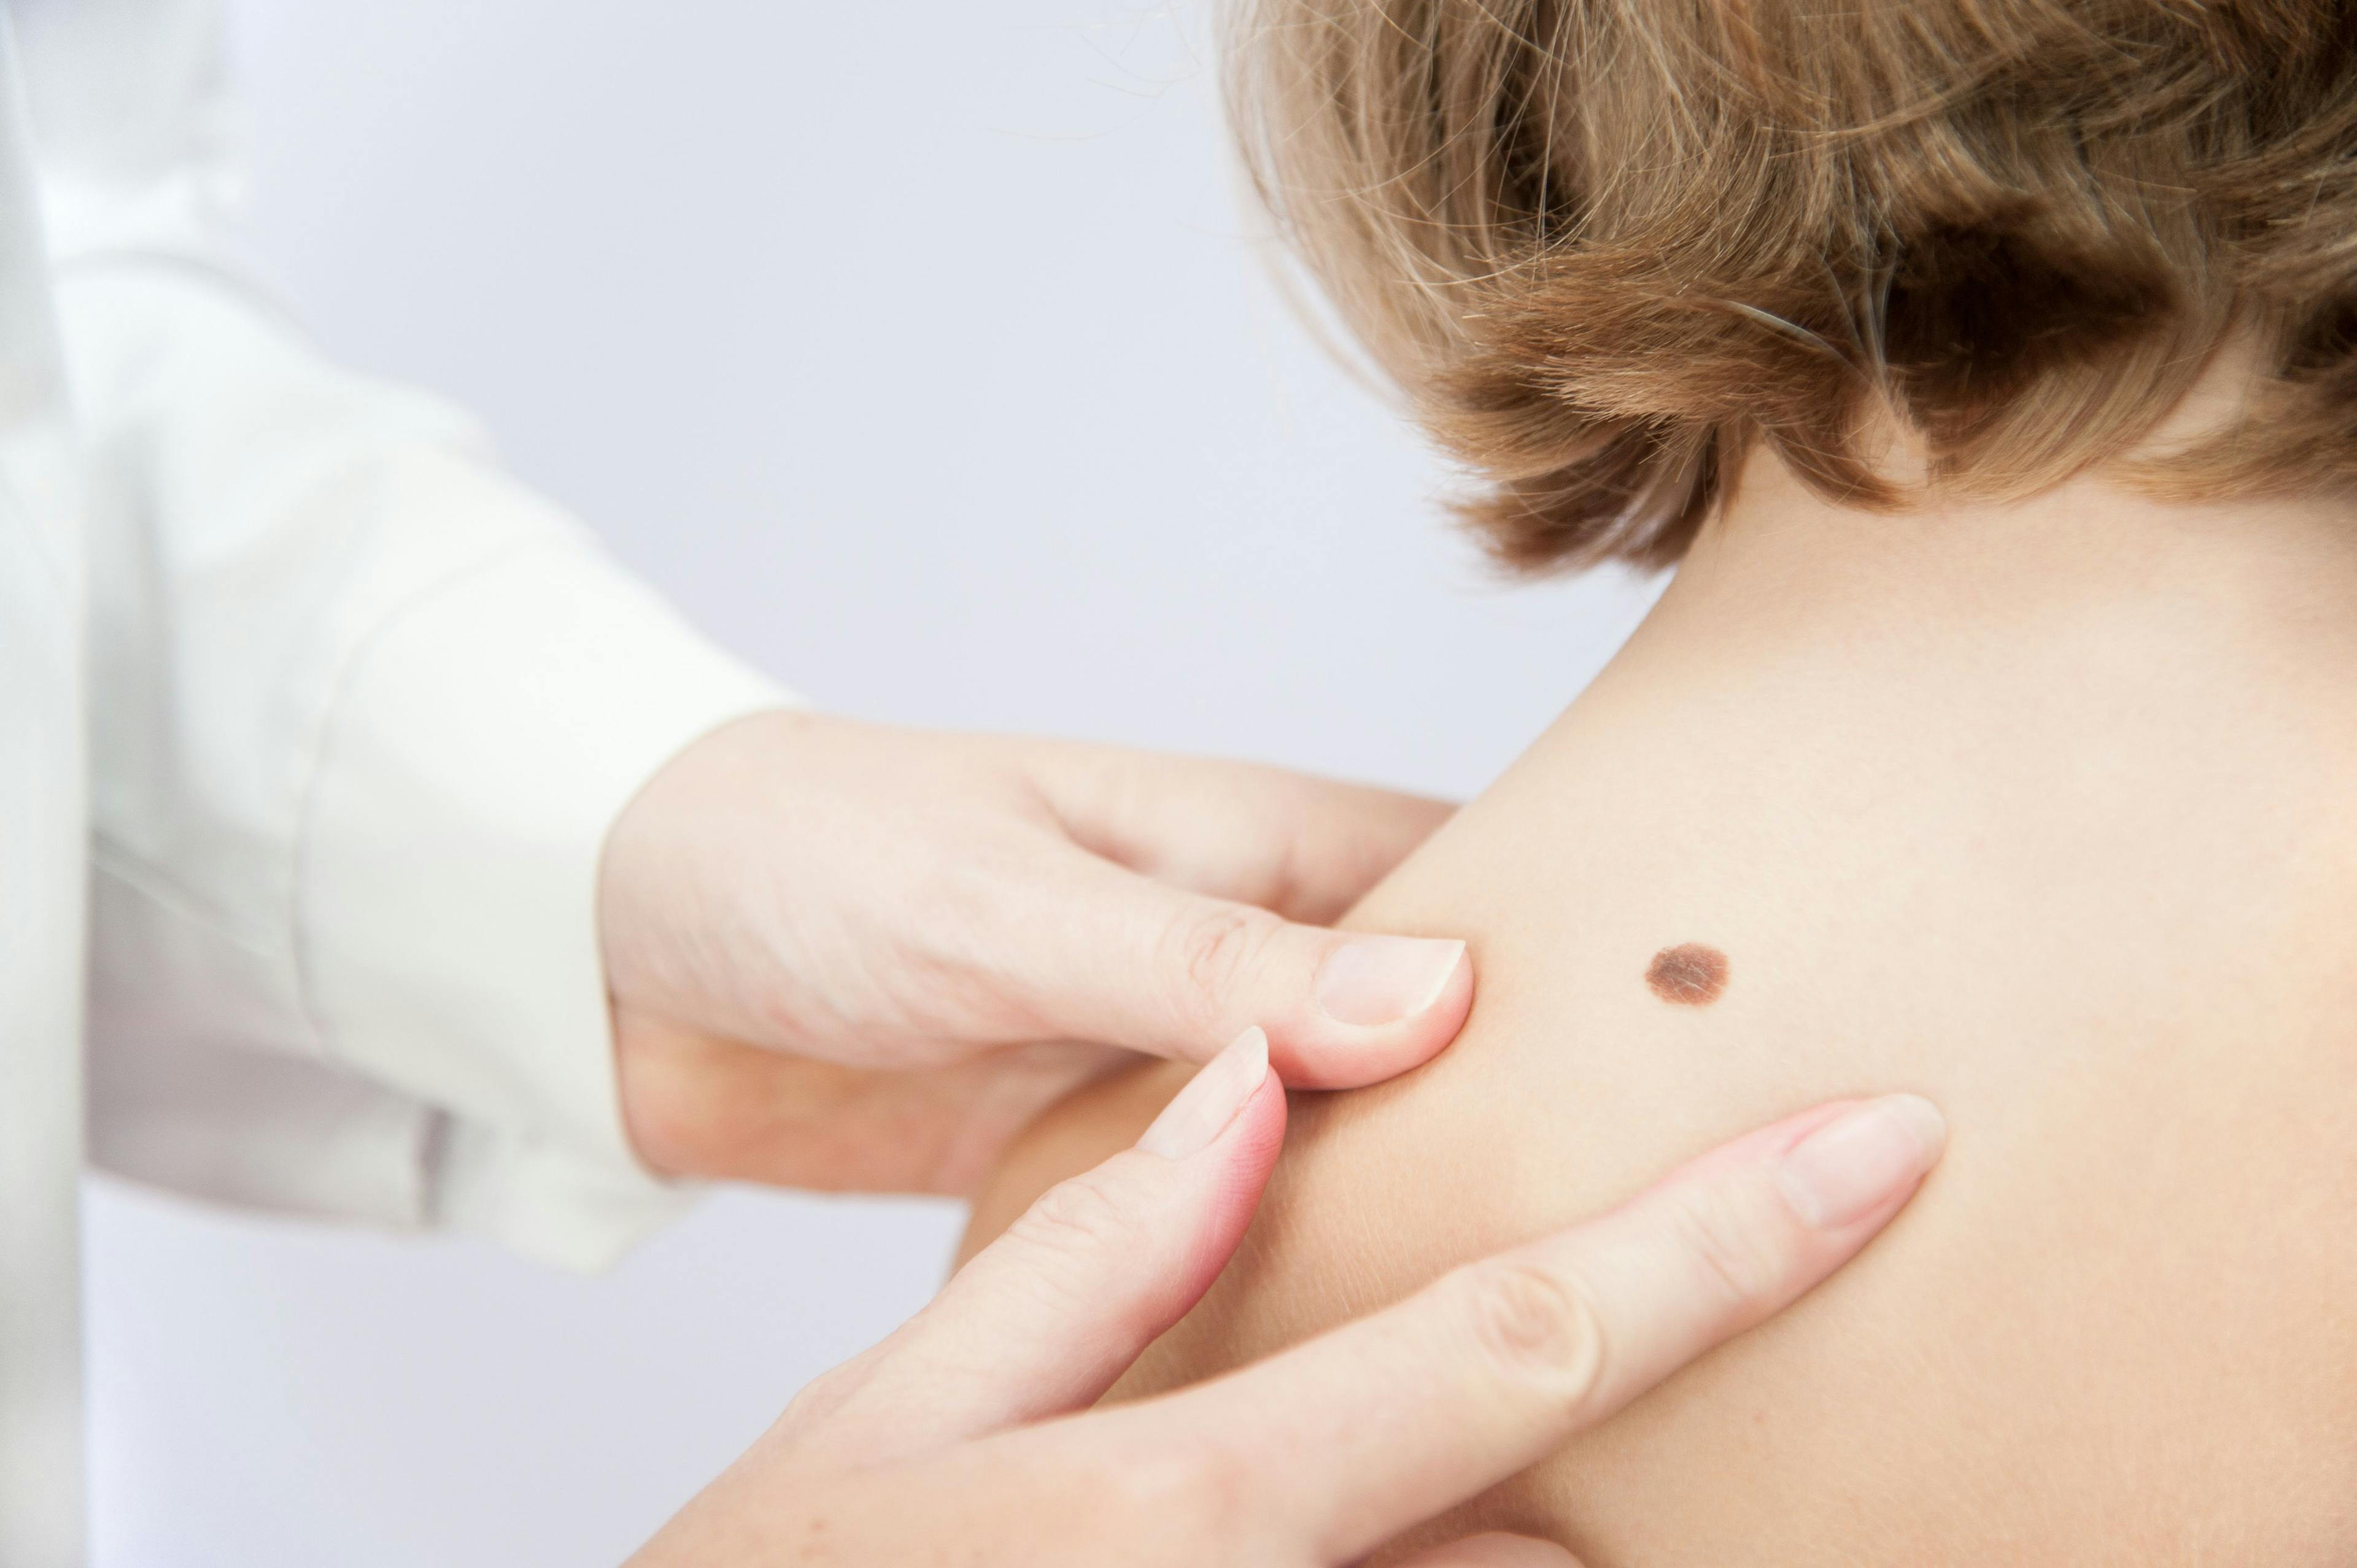 POLL: Do you educate your patients about skin cancer?